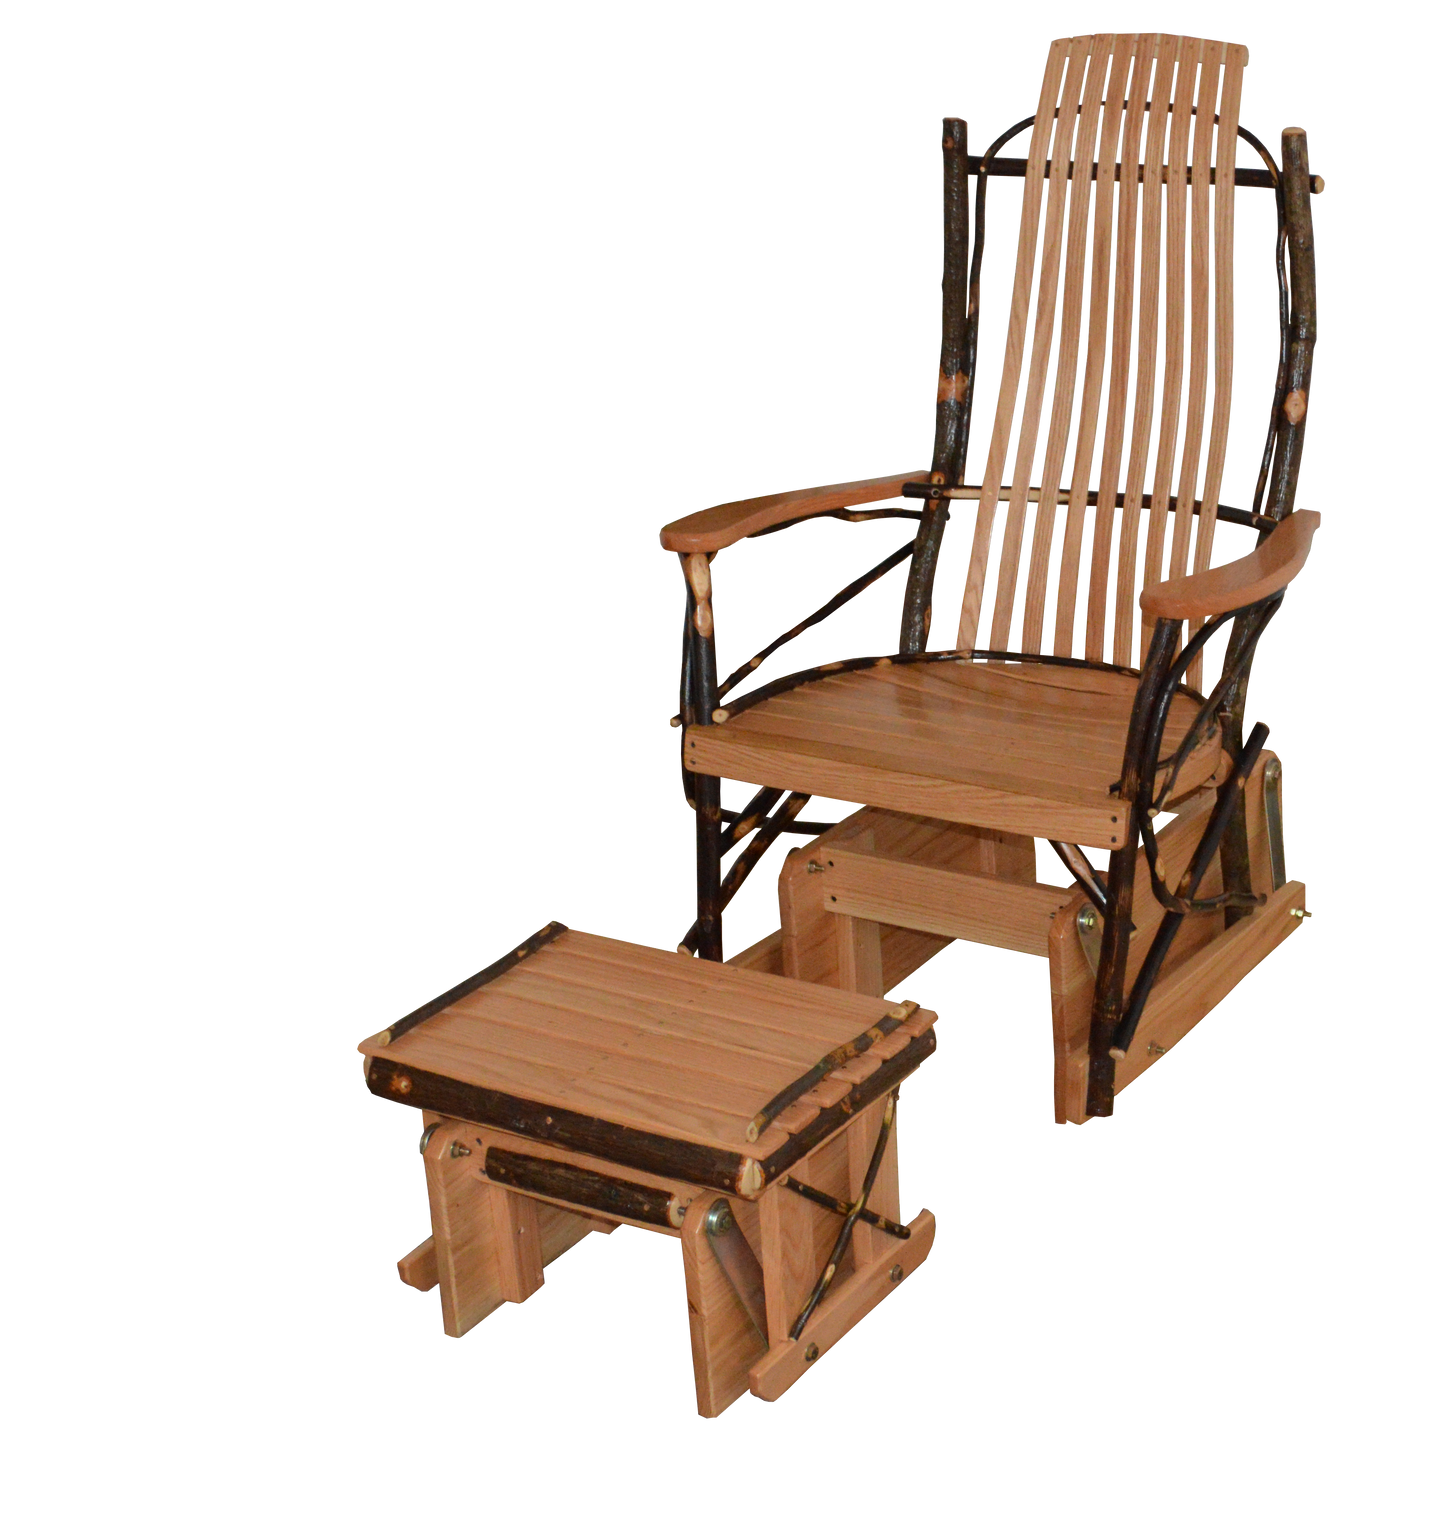 A&L Furniture Co. Amish Bentwood Hickory Glider Rocker with Gliding Ottoman Set - LEAD TIME TO SHIP 4 WEEKS OR LESS